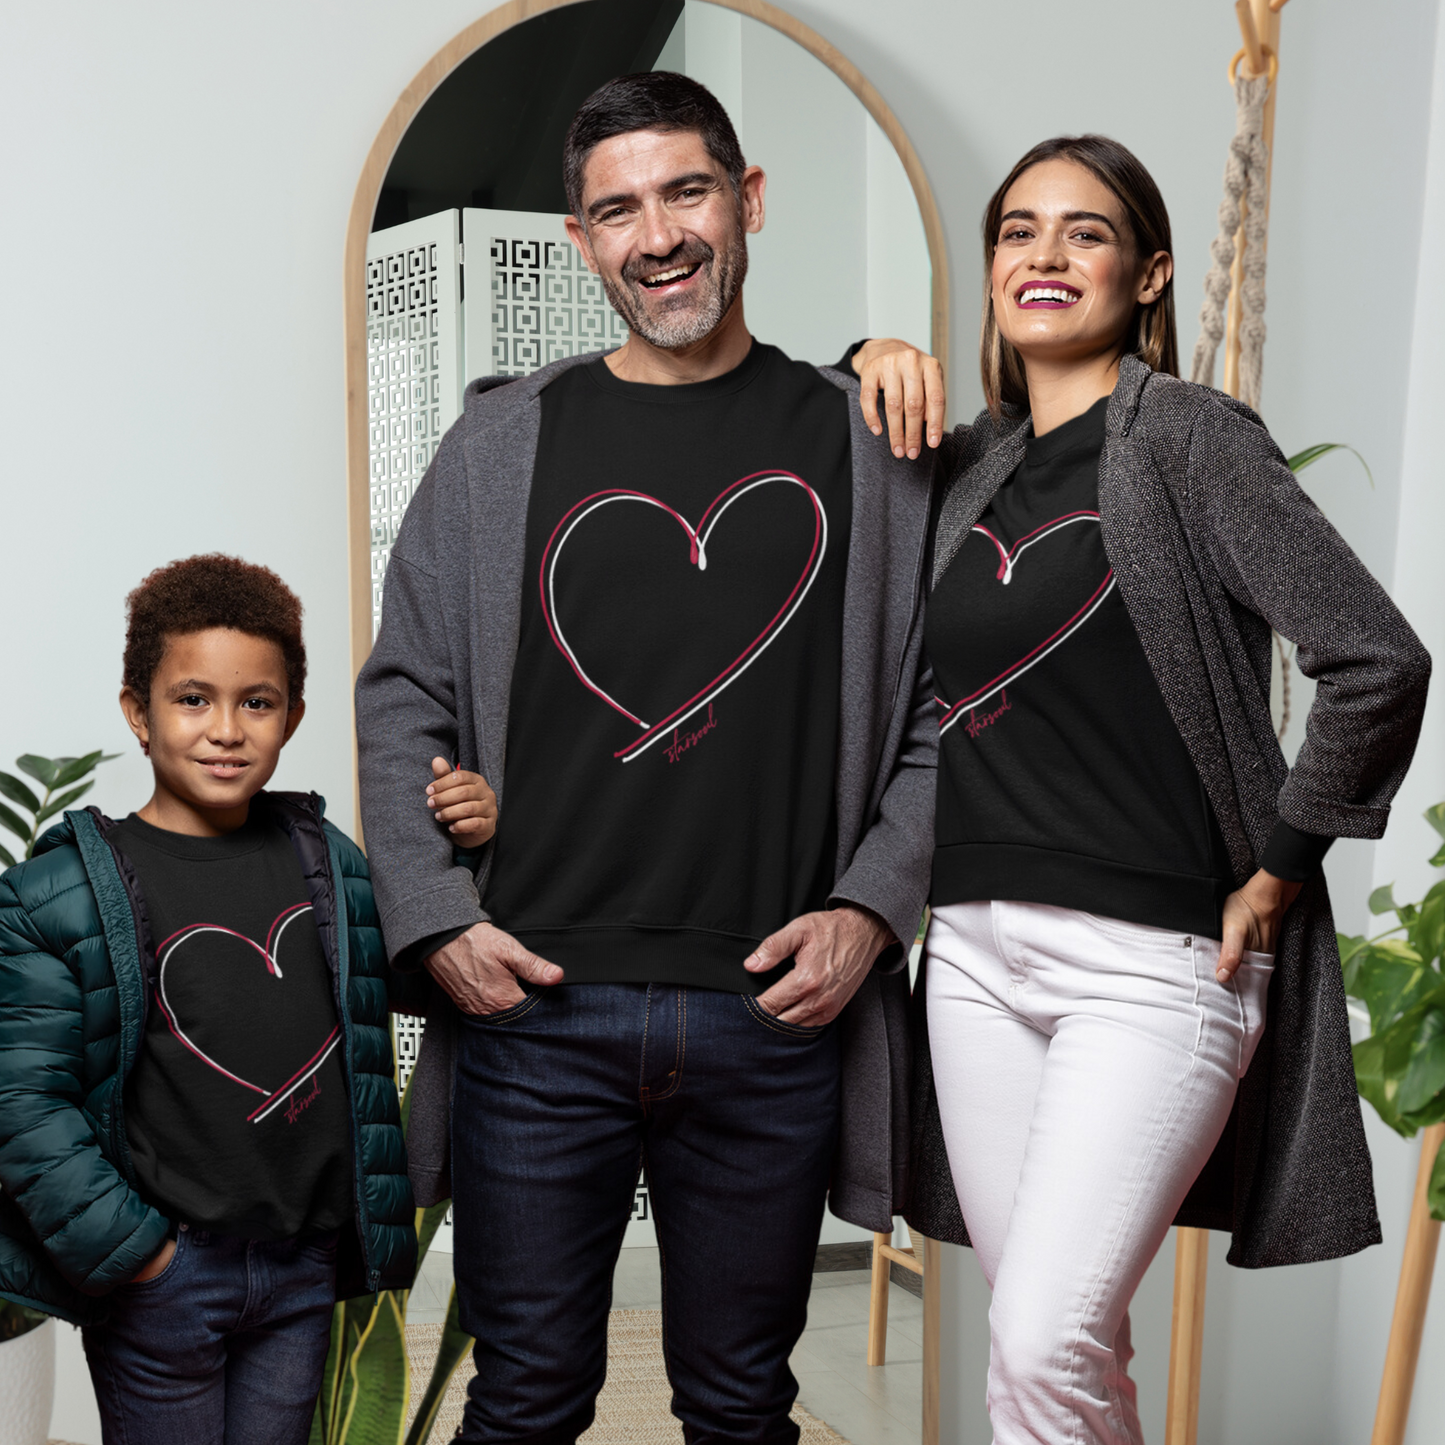 family wearing black sweatshirt with double red white heart design benefitting heart disease